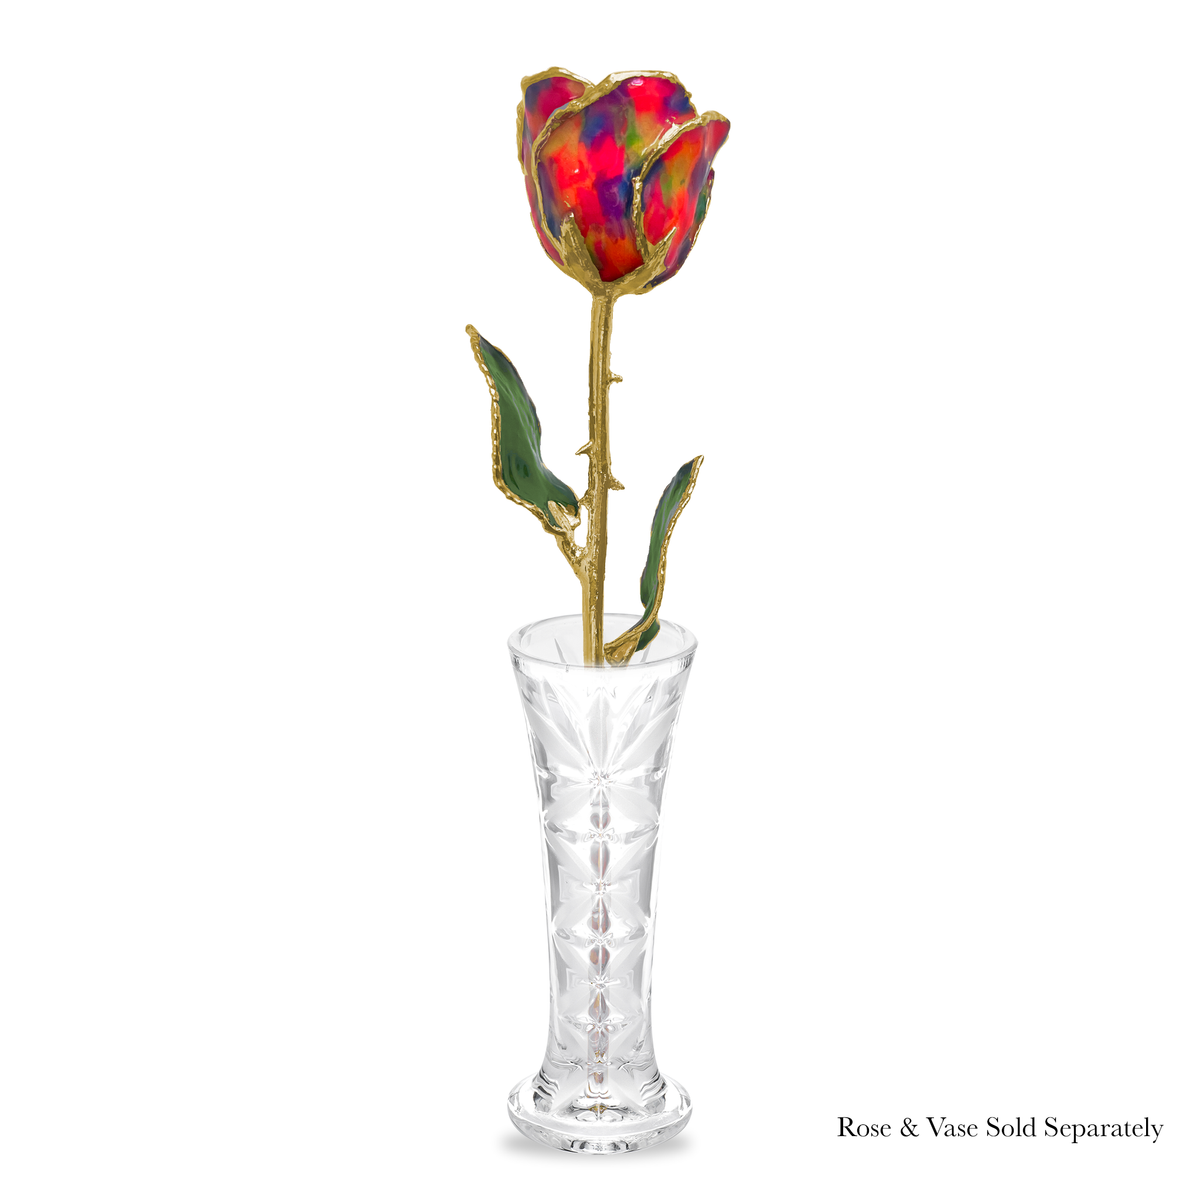 24K Gold Forever Rose - The Picasso Rose